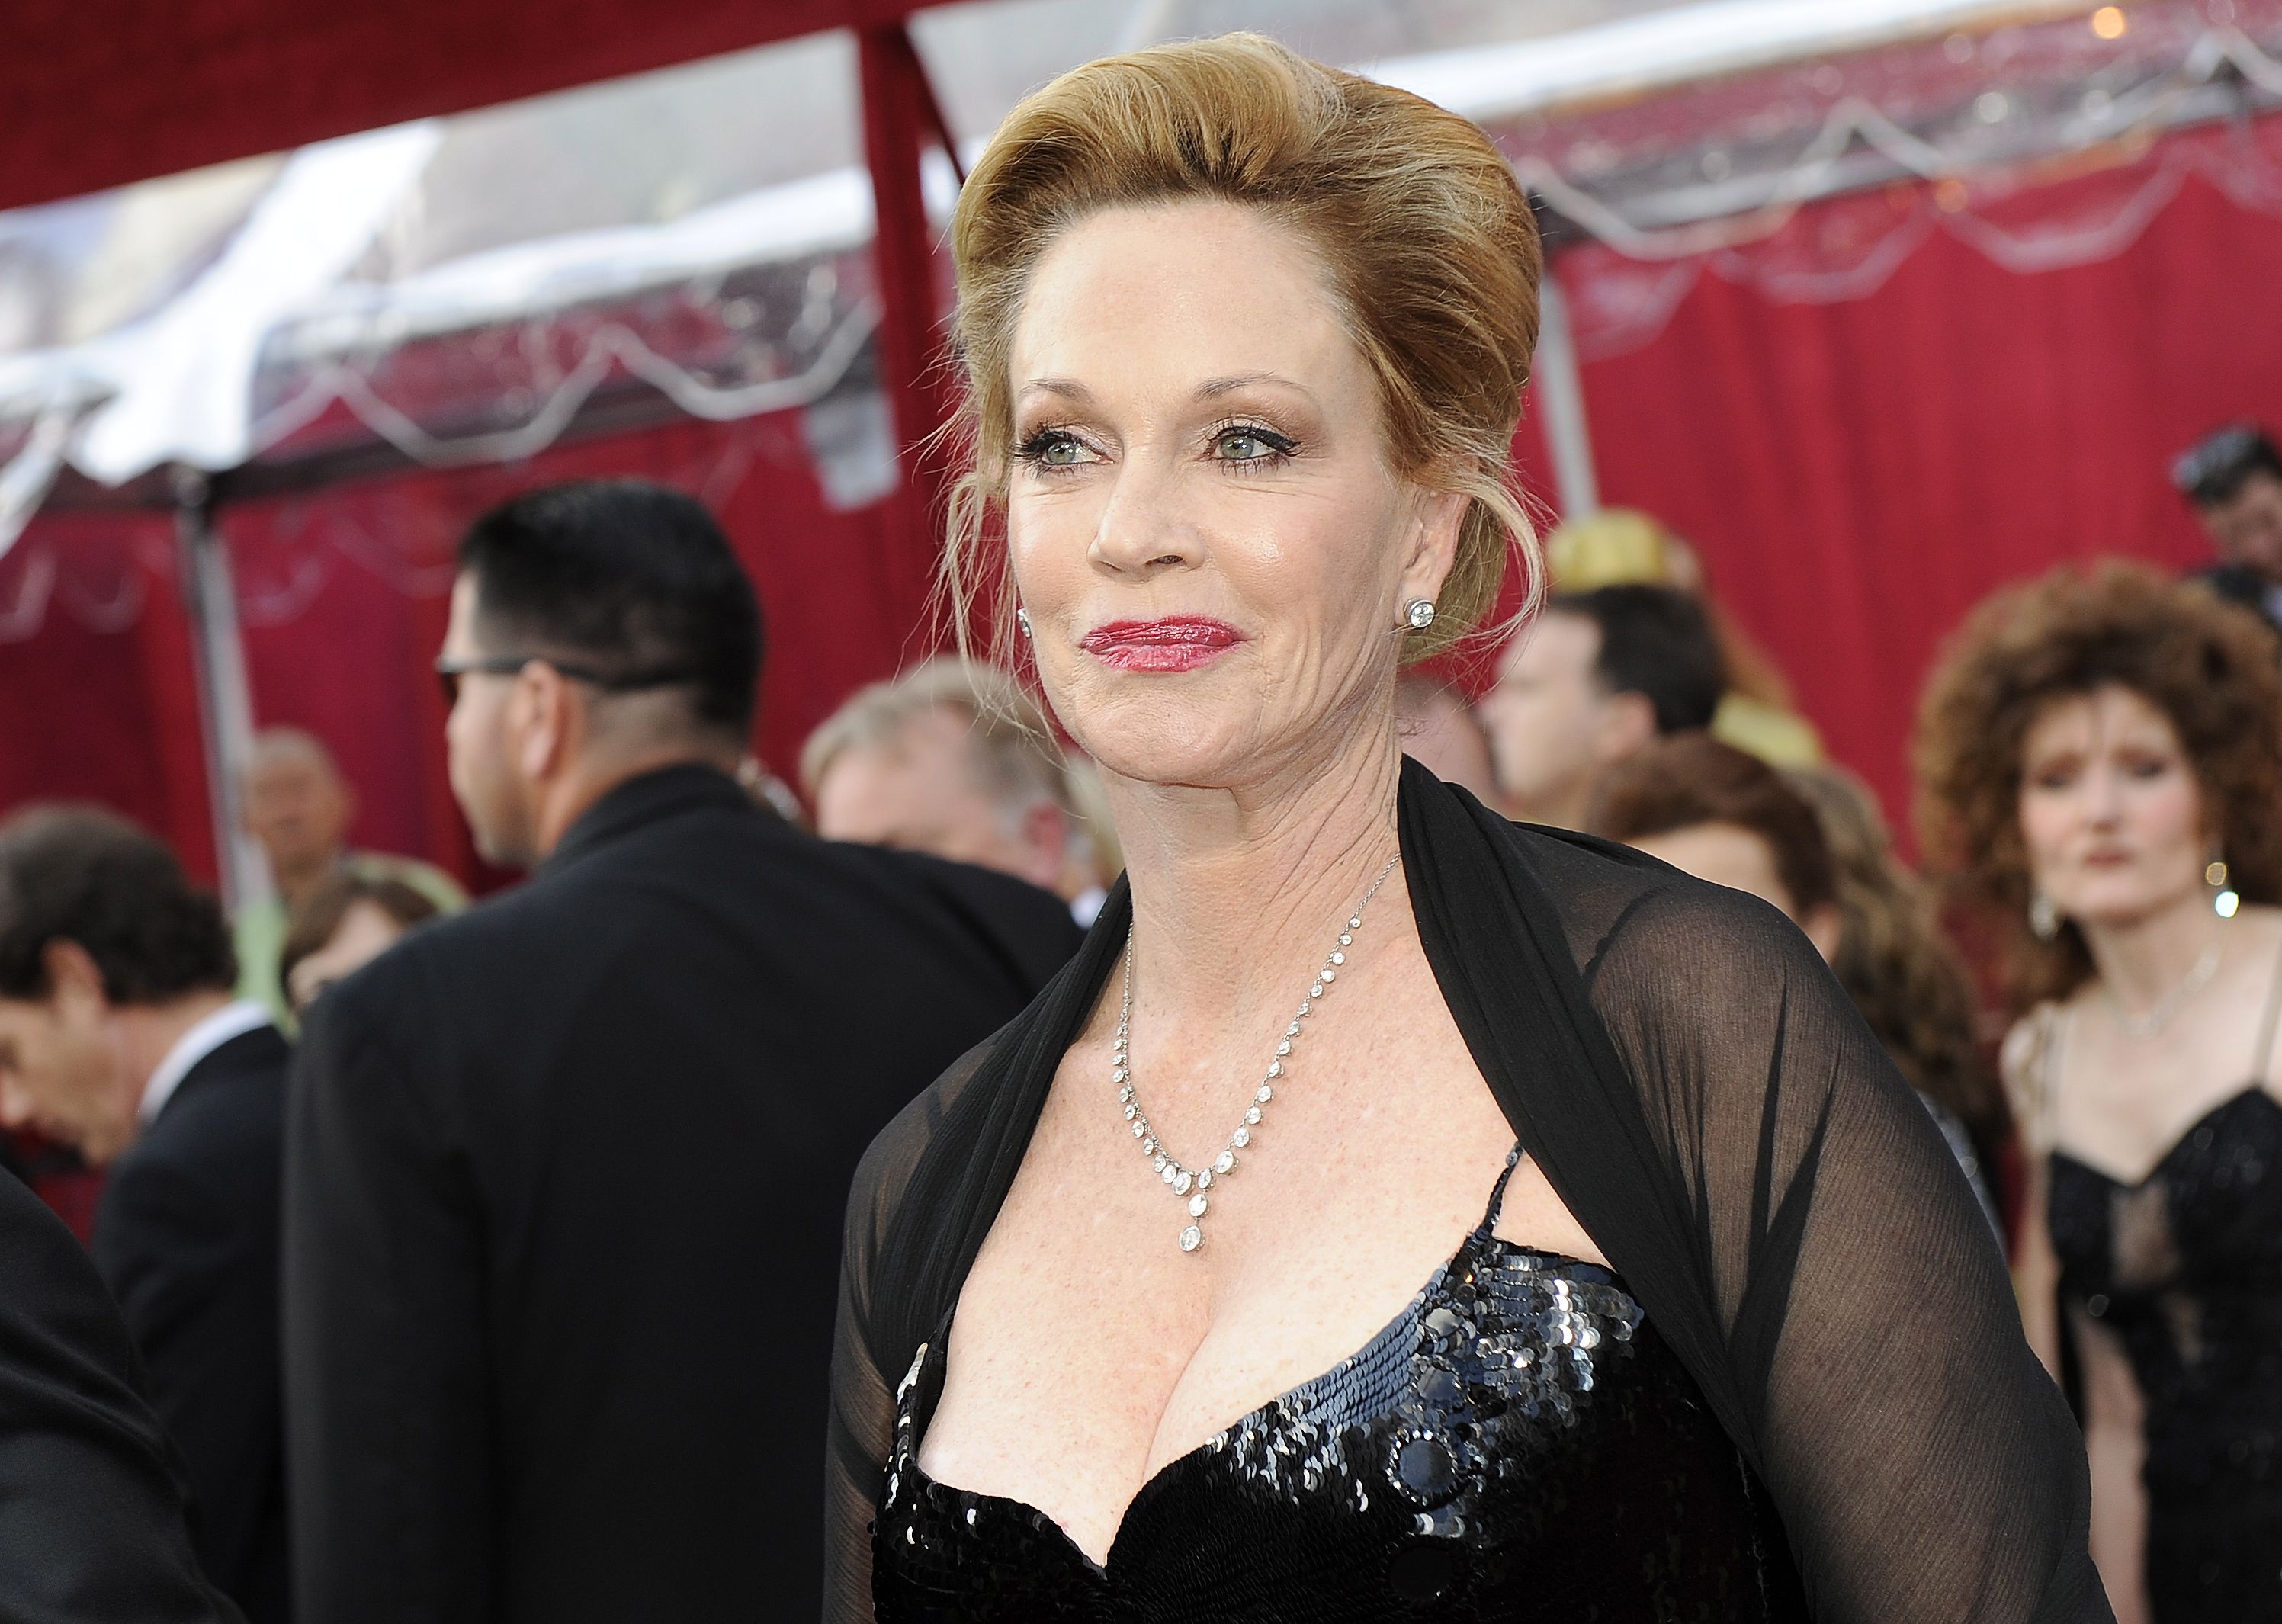 <p>In early 2017, Melanie Griffith (pictured in 2010) told Porter magazine that she didn't realize the plastic surgeries "she had over 20 years ago" had changed her looks so dramatically until other people started pointing it out. "I was so hurt," she said. "I went to a different doctor, and he started dissolving all of this s*** that this other woman doctor had put in. Hopefully, I look more normal now."</p>